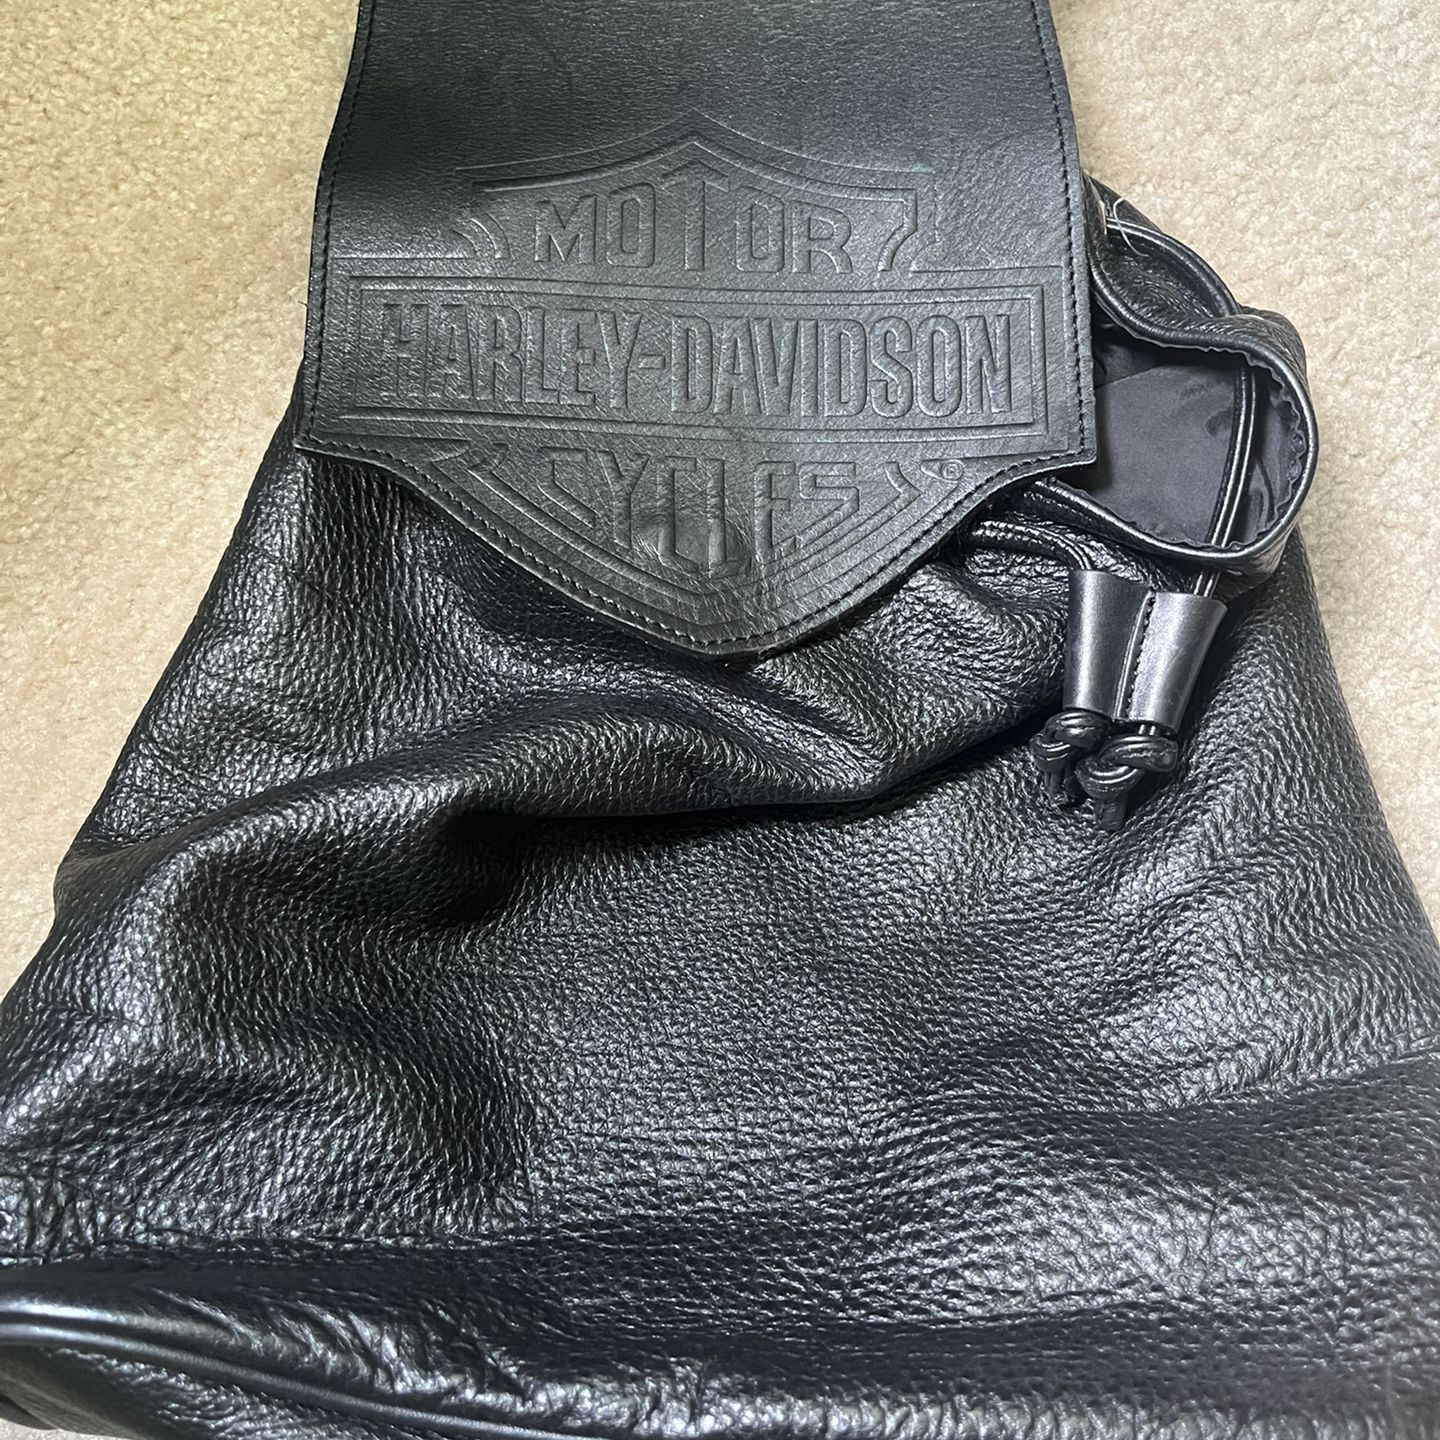 Harley Davidson Backpack Convertable for Sale in Lombard, IL - OfferUp